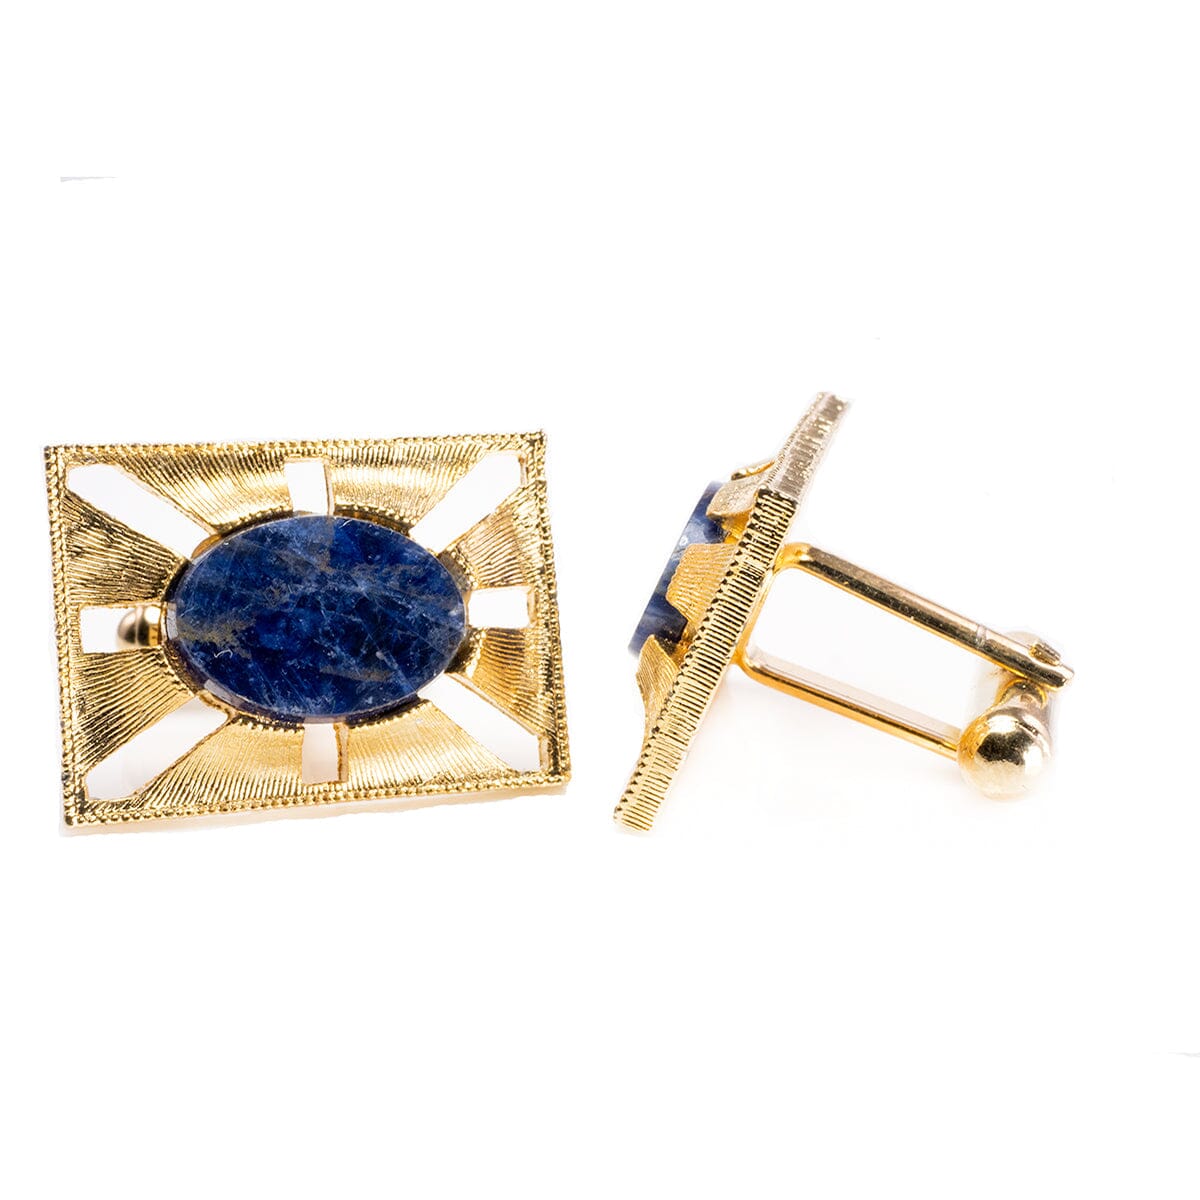 Great Lakes Boutique Traditions Limited Edition Vintage Sodalite Cuff Link Set with Coordinating Pin